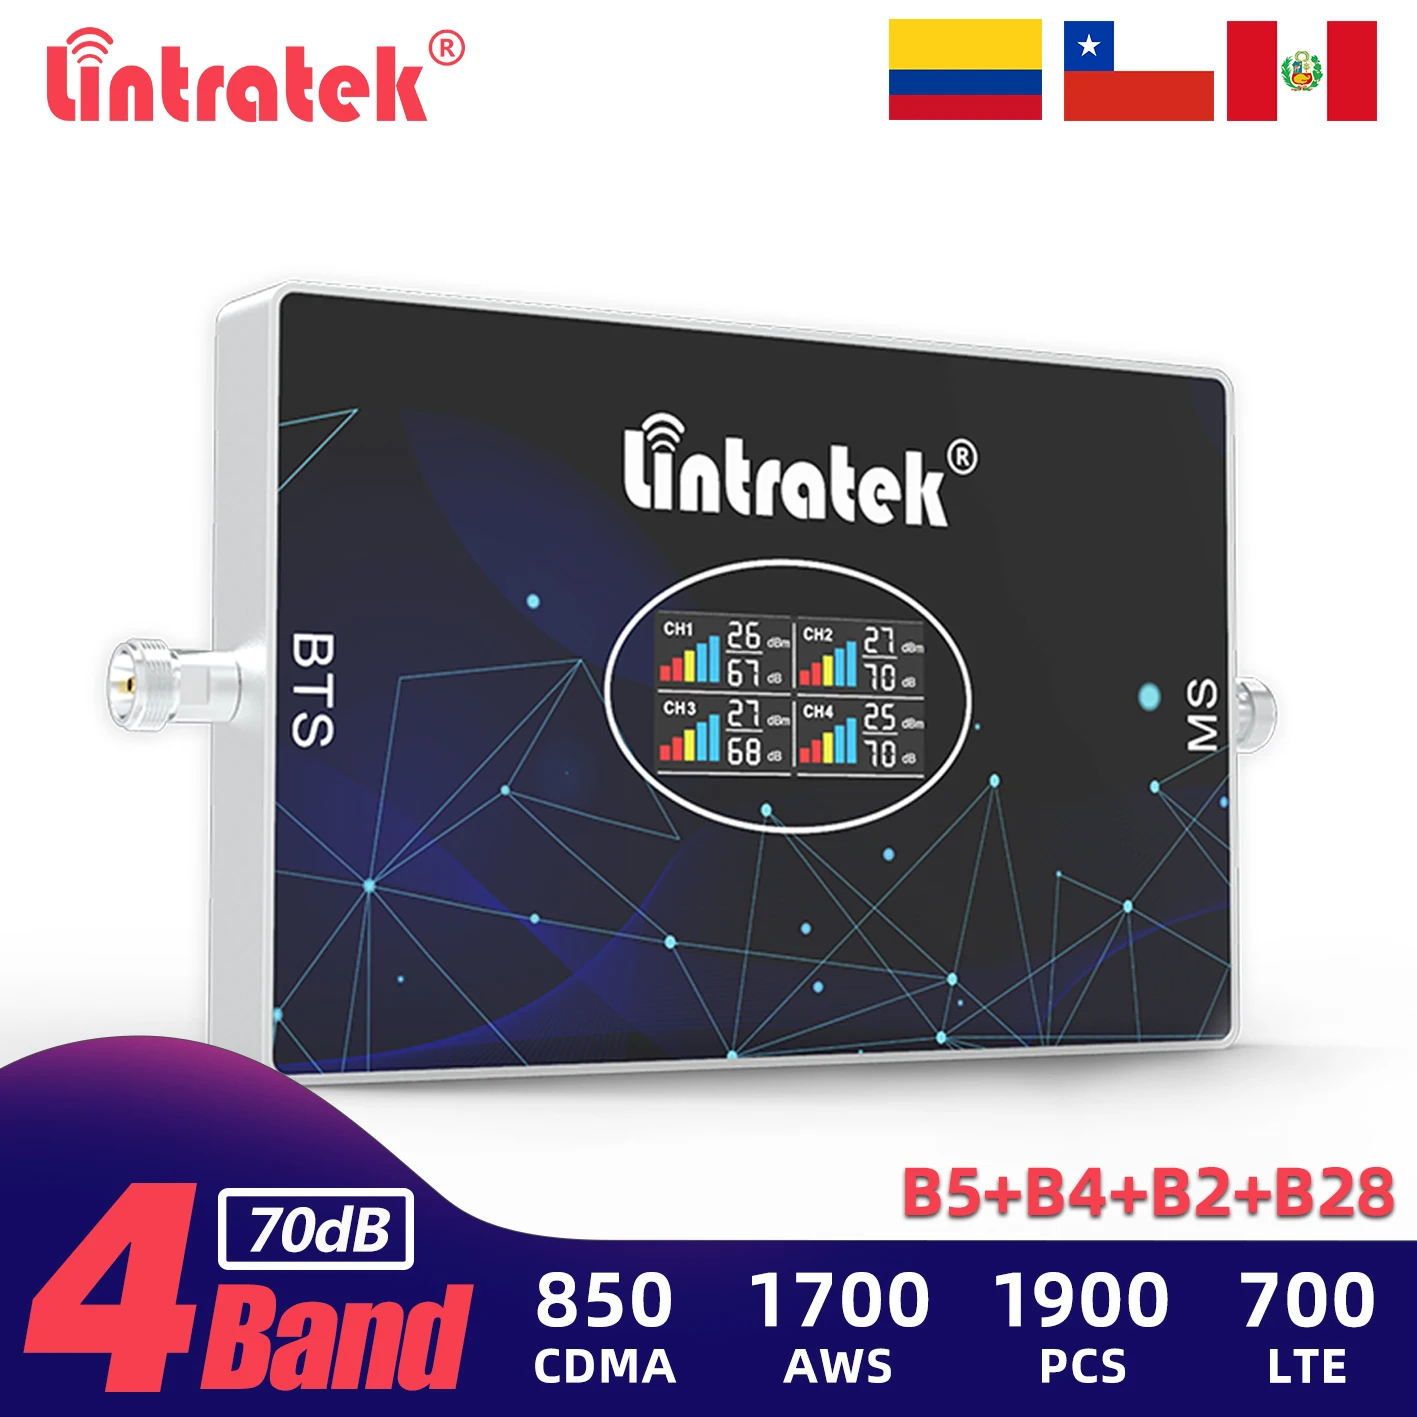 Lintratek Four-Band Signal Repeater 850 700 1900 1700 Band 28 Cellular Booster 2G GSM 3G 4G LTE Cell Phone Network Amplifier goboost gsm 2g 3g cdma 850 900 cellular amplifier 4g aws 1700 pcs 1900 single band signal booster lte 700 2600 mhz repeater kit